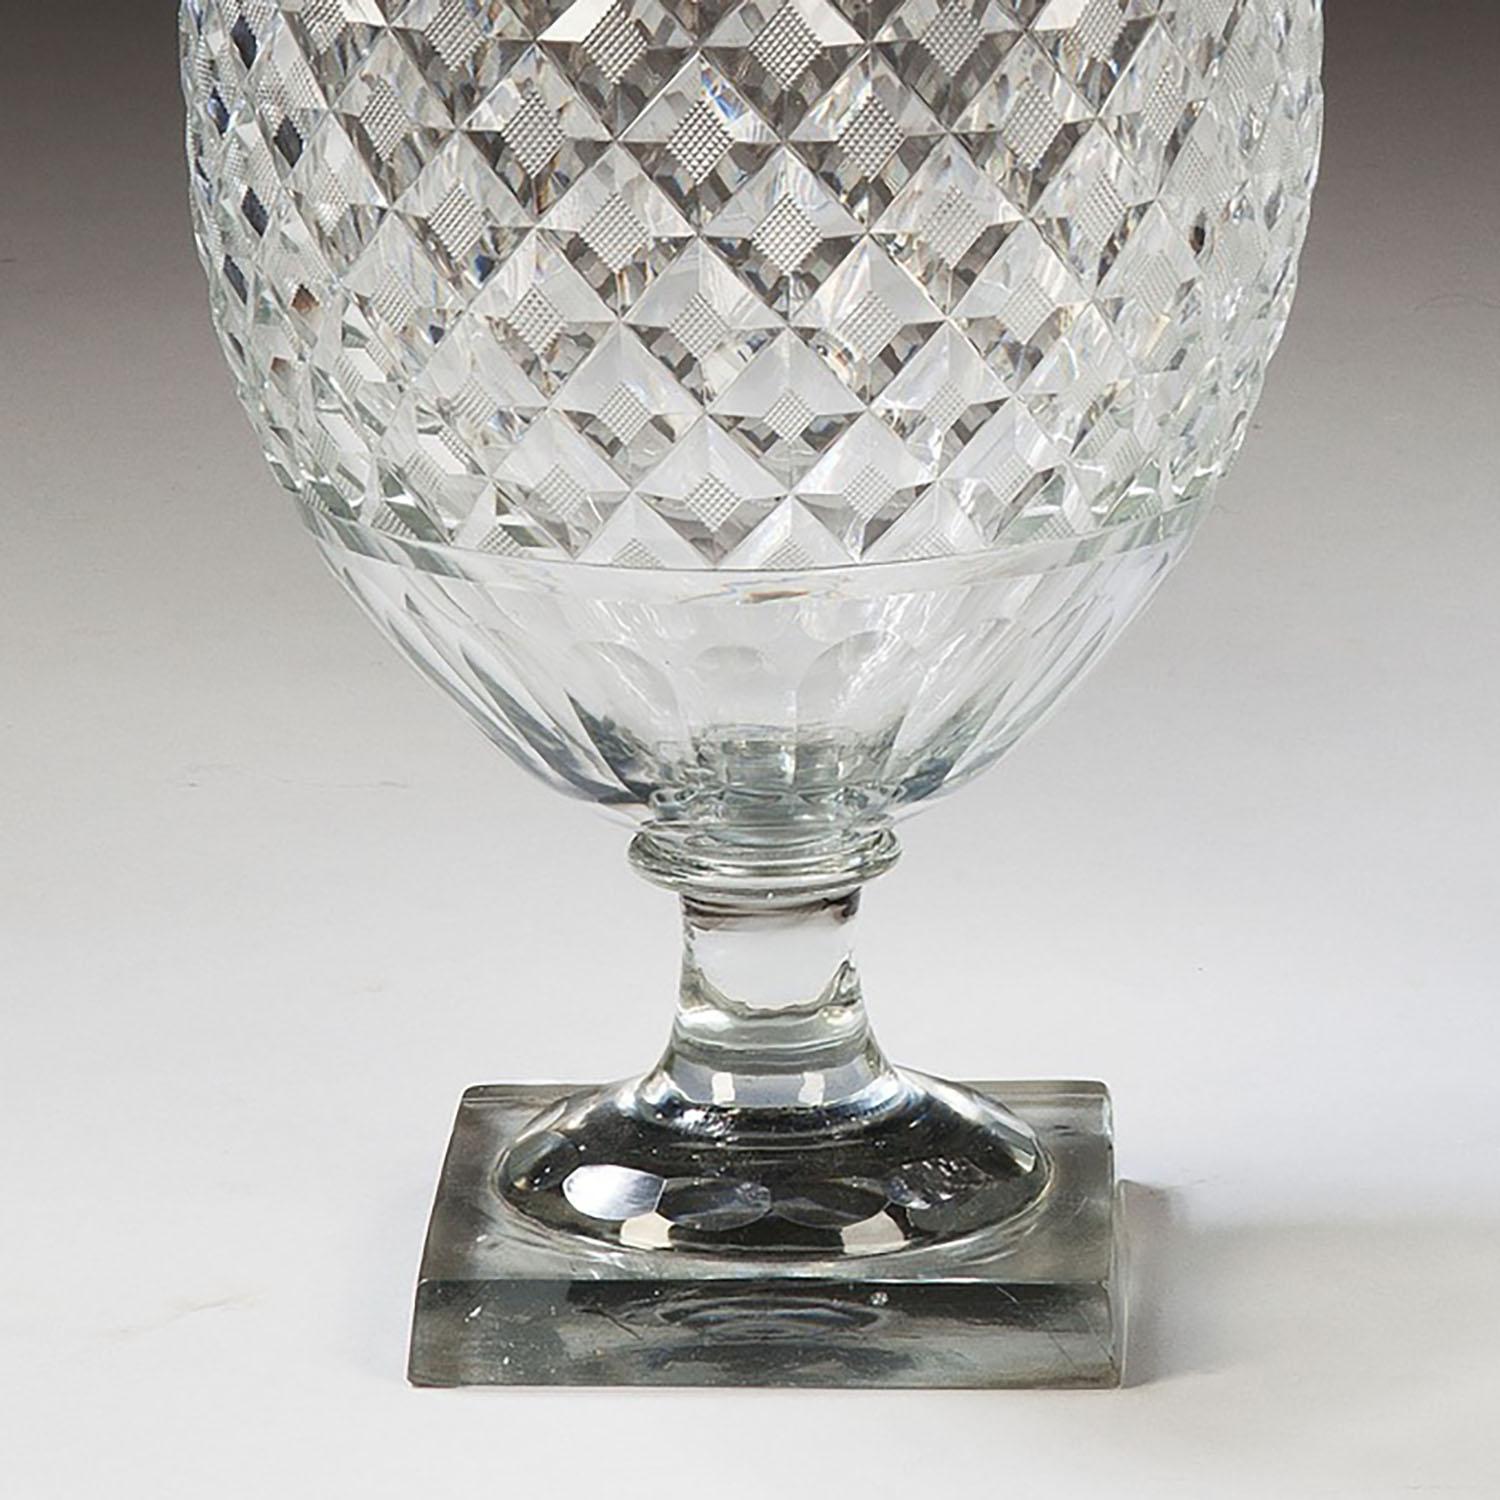 A pair of cut glass over scale fruit coolers from the Belgian Voneche works with boldly diamond cut and facetted bodies and covers. Standing on faceted stem feet.
Belgium, circa 1830

Measures: Height 18 in (45cm), width 8 in (20cm).